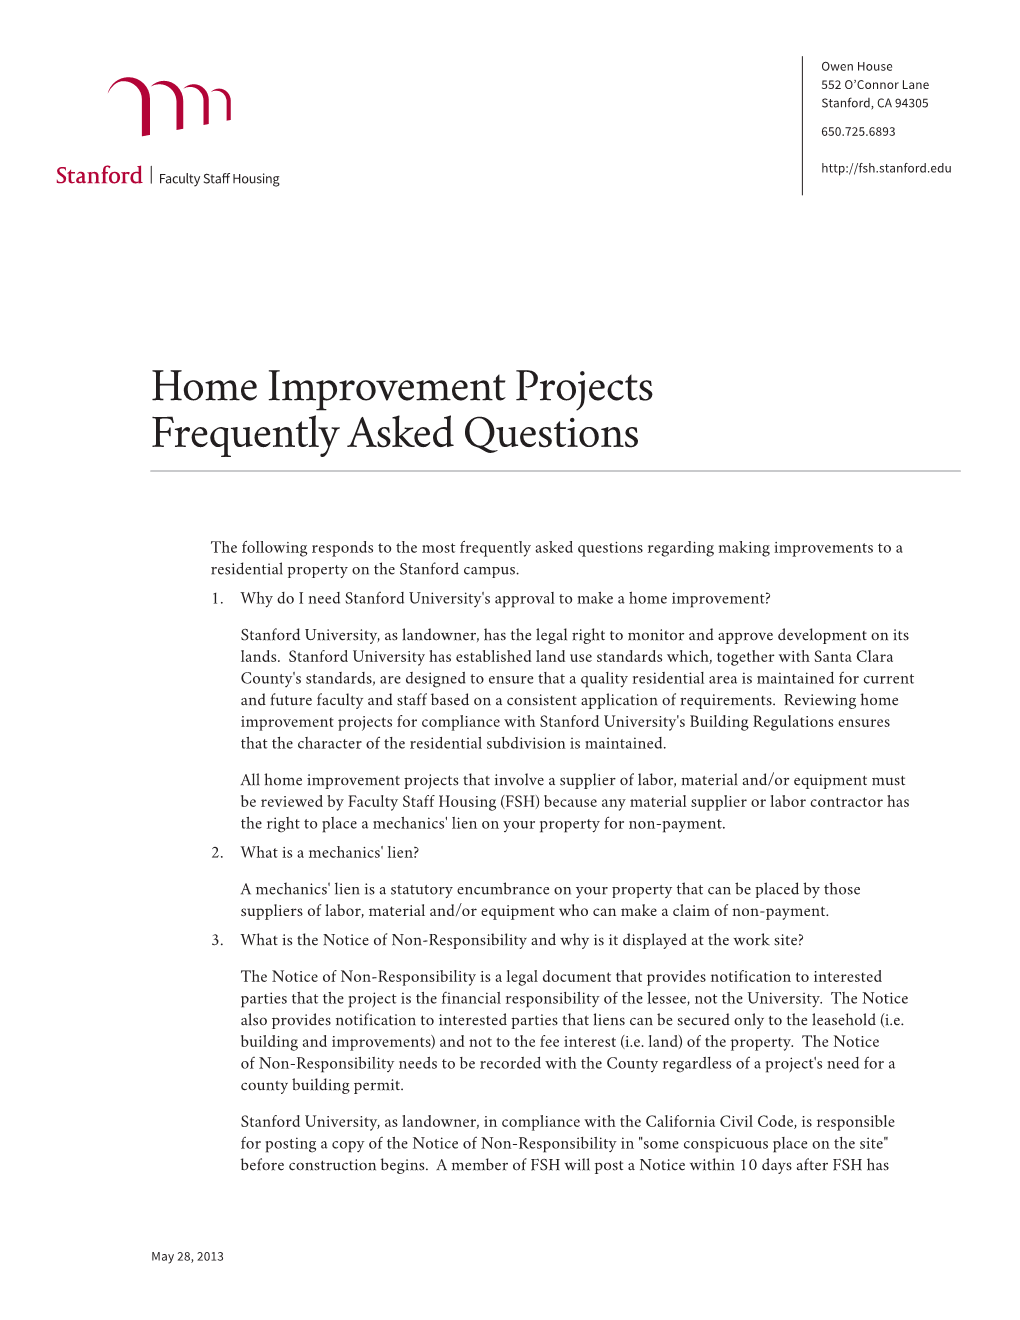 Home Improvement Projects Frequently Asked Questions